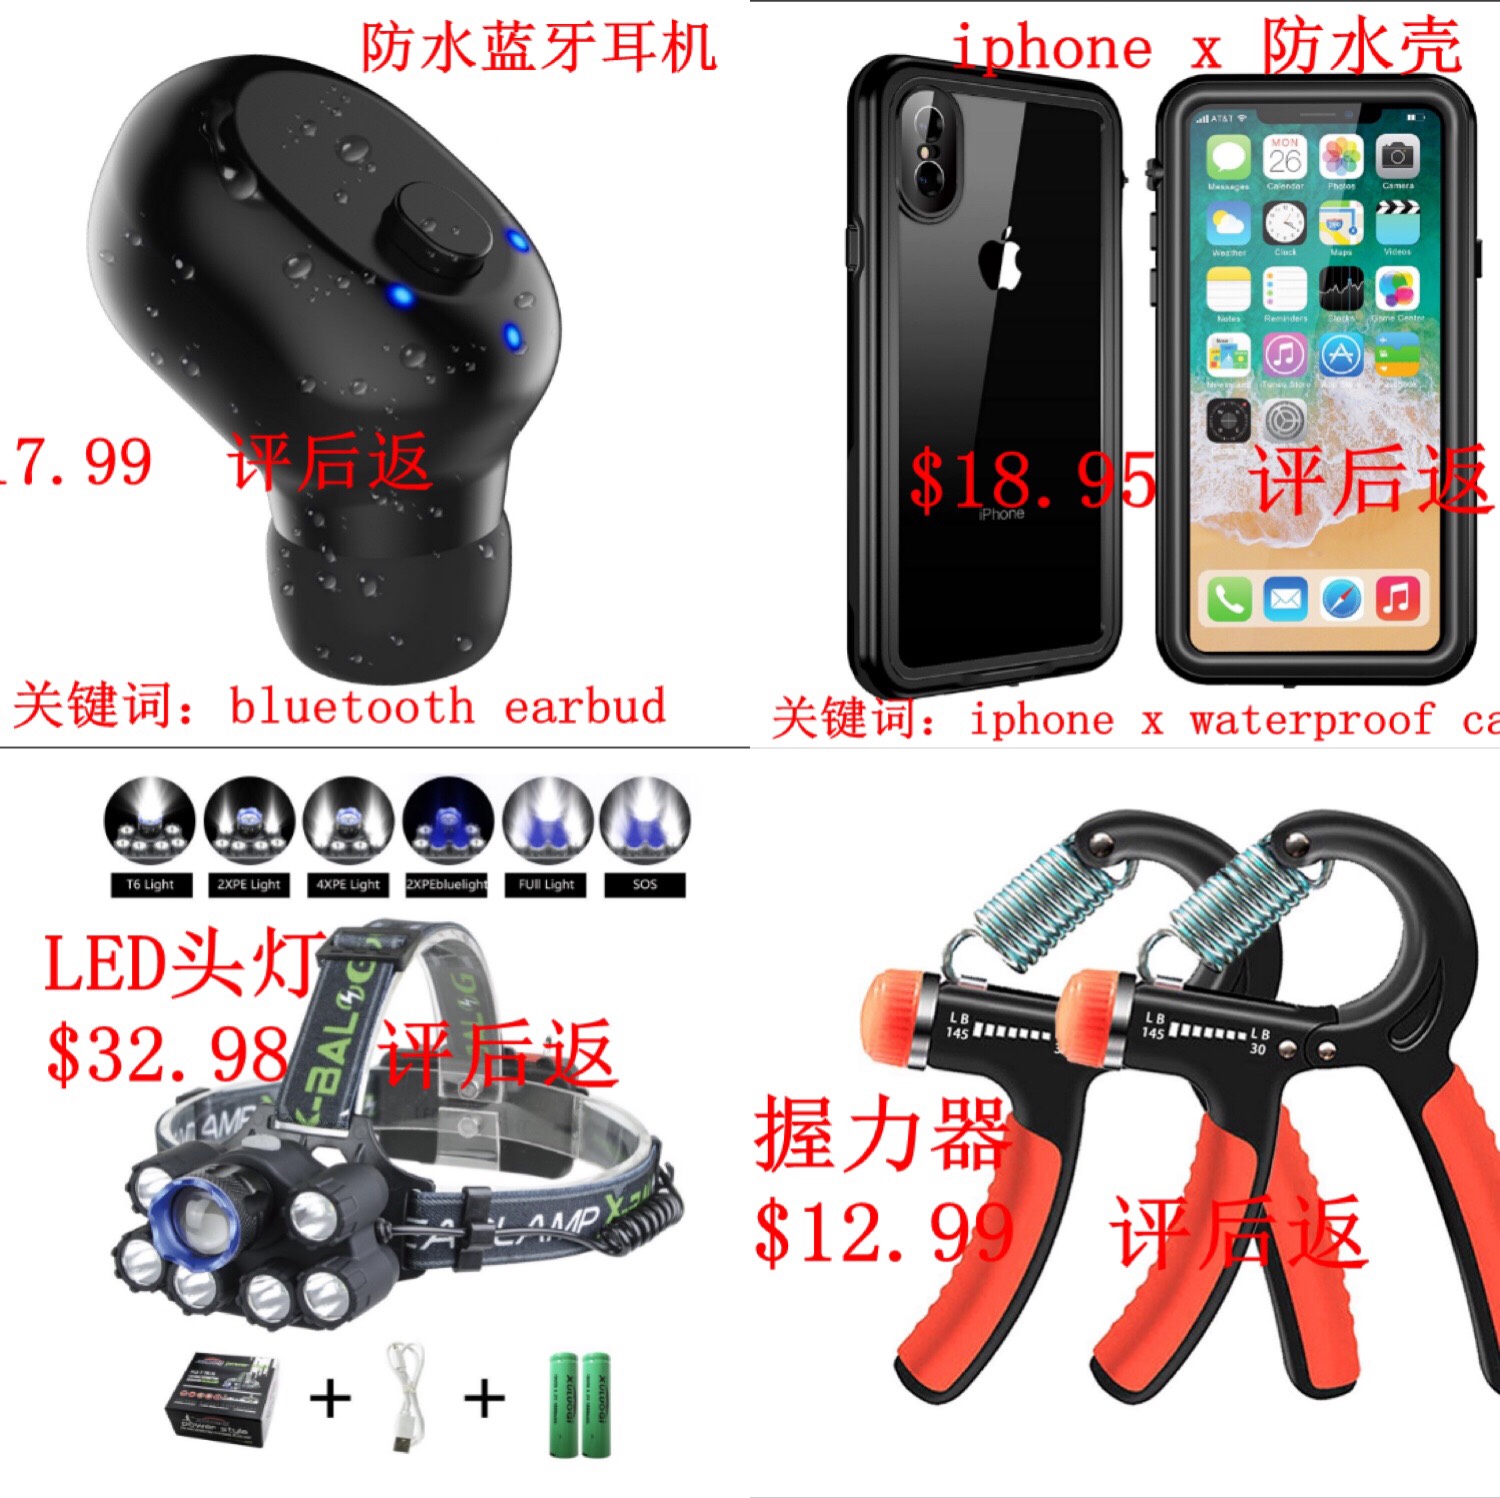 image wechat review groups from 2018